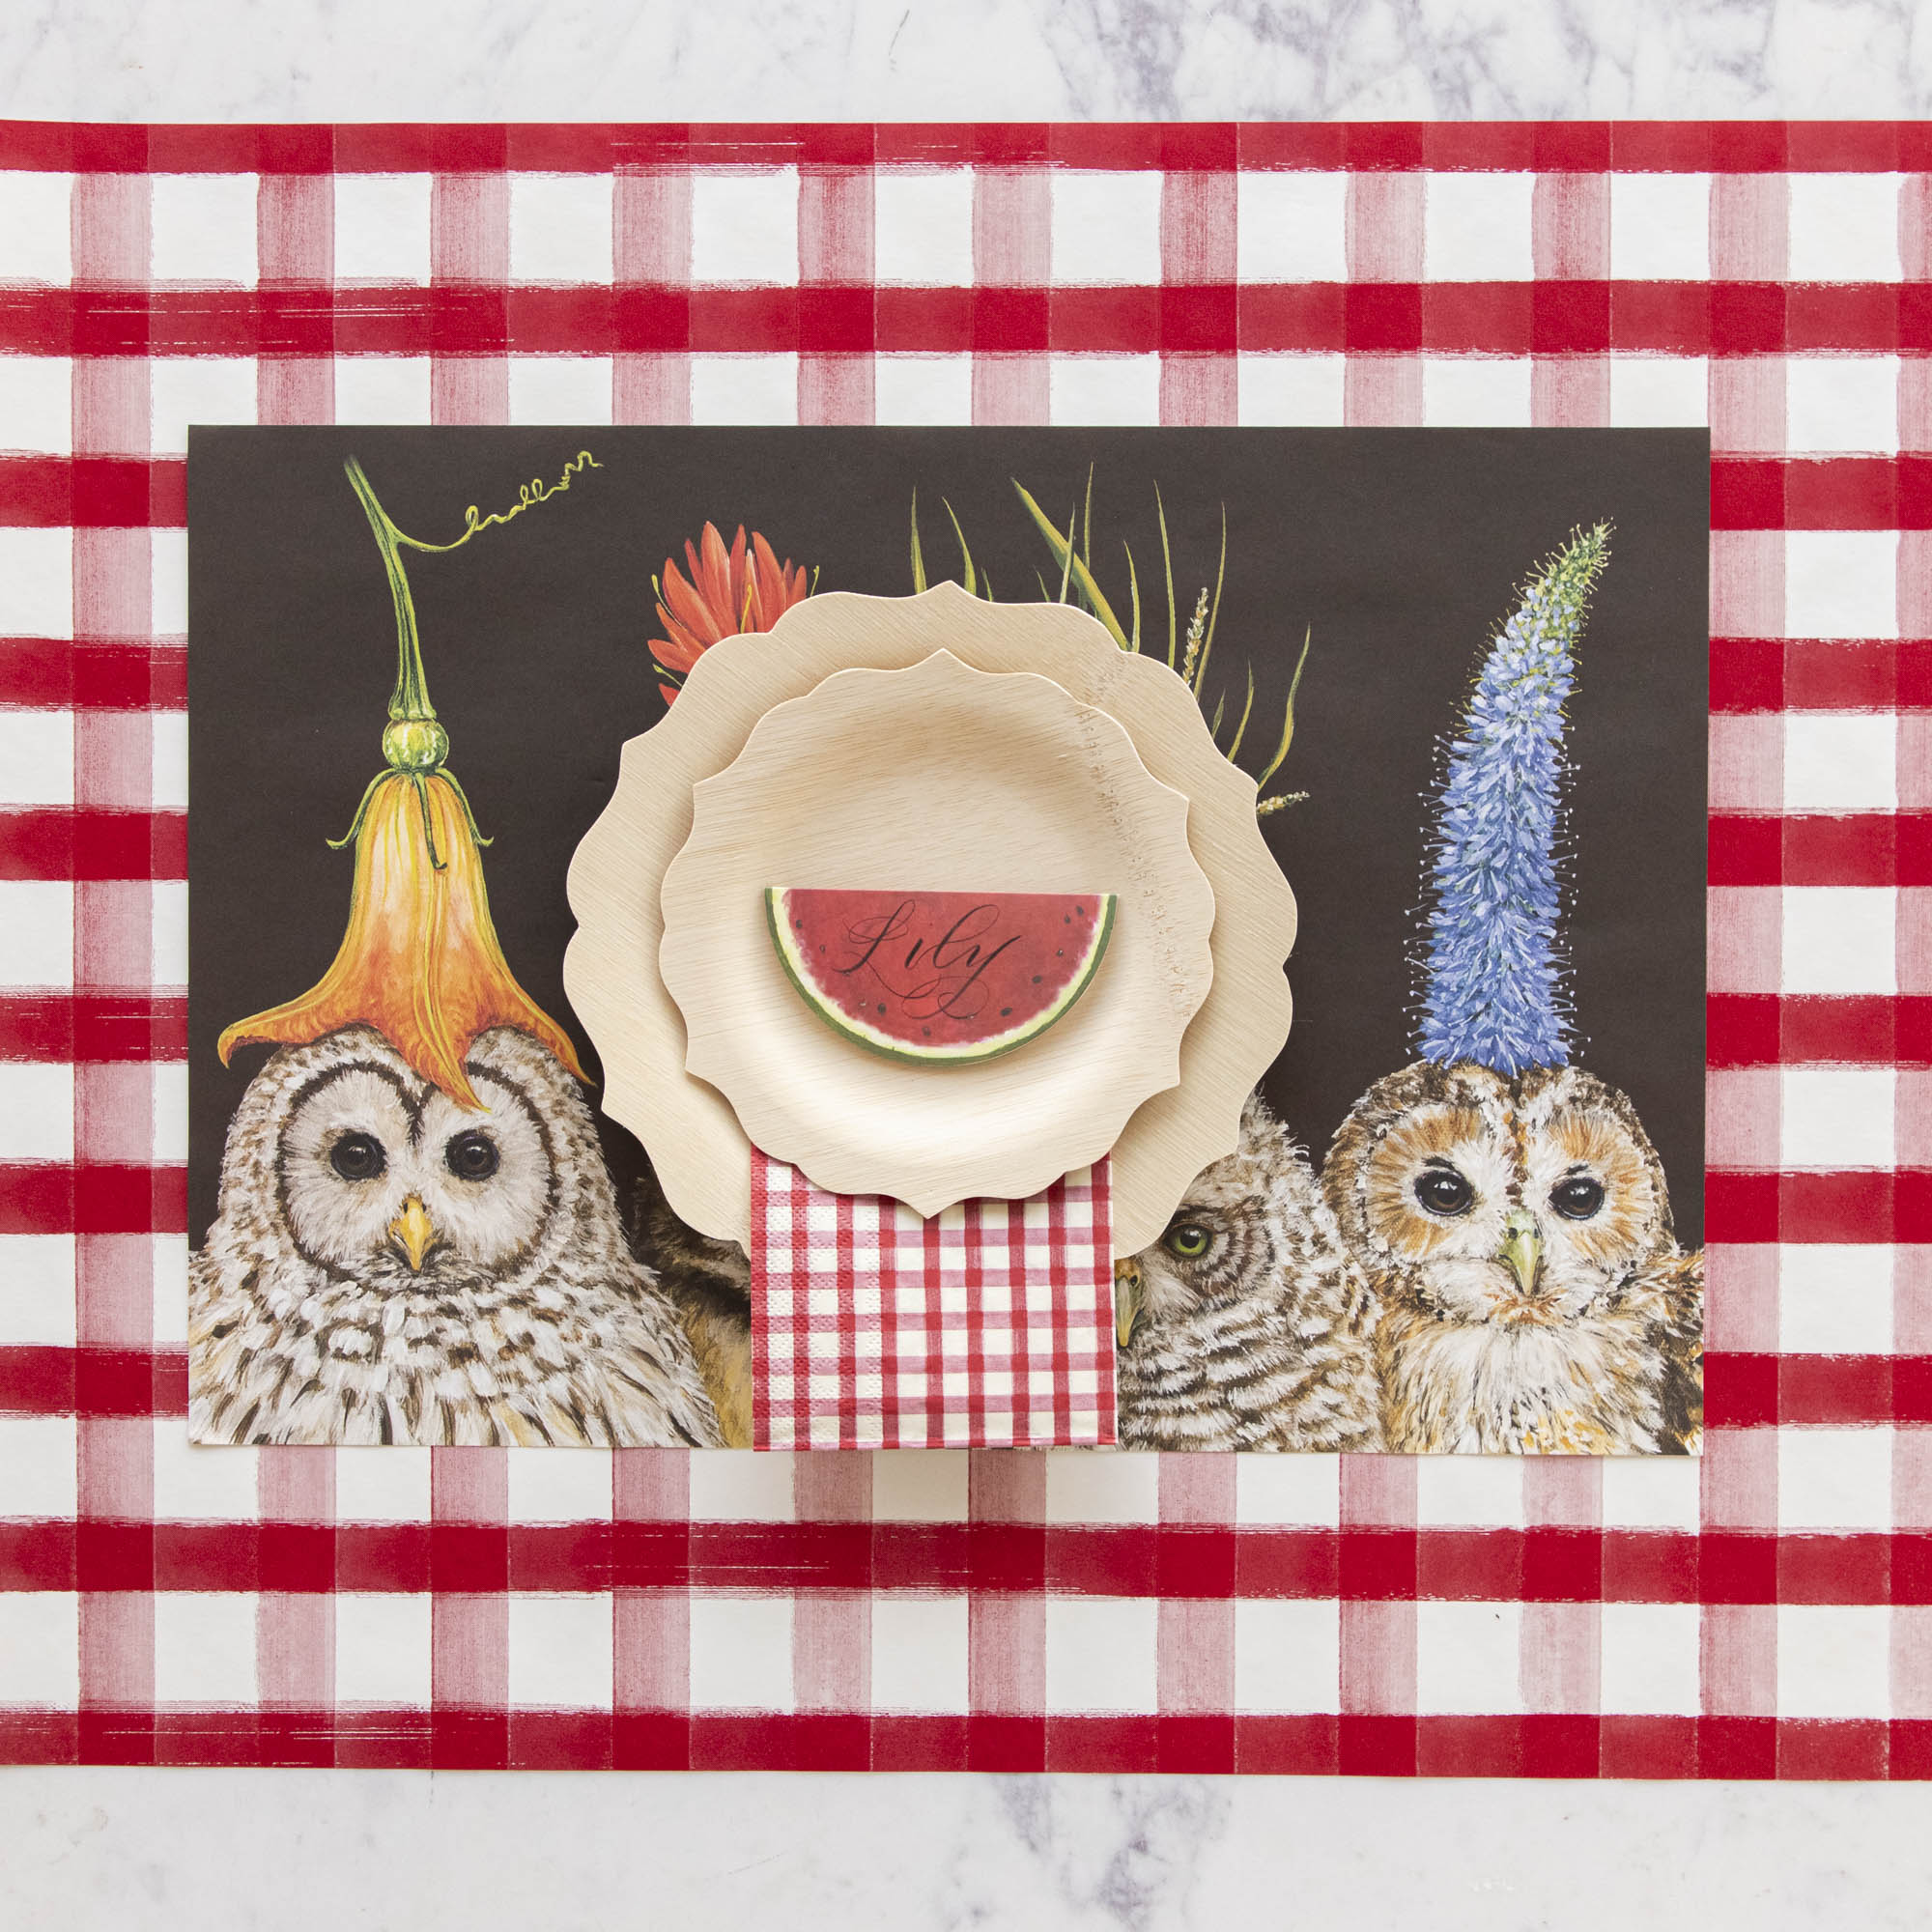 The Baby Owls Placemat used in a place setting over a Red Painted Check Runner.